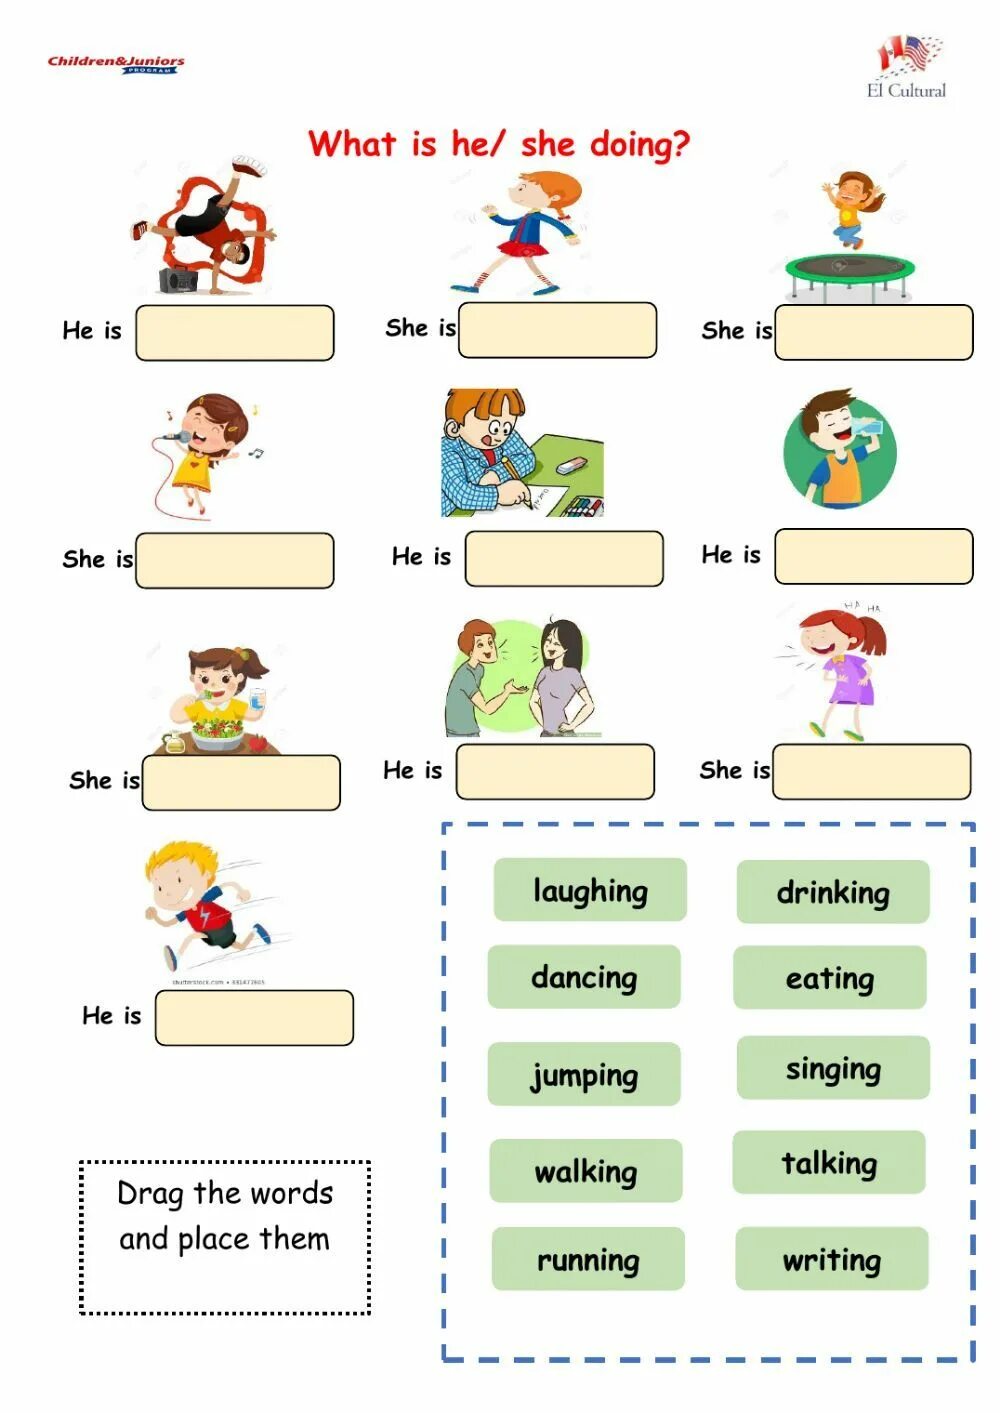 Does she living there. Continuous английском Worksheets. Present Continuous упражнения Worksheets. Грамматика present Continuous English. Present Continuous for Kids.